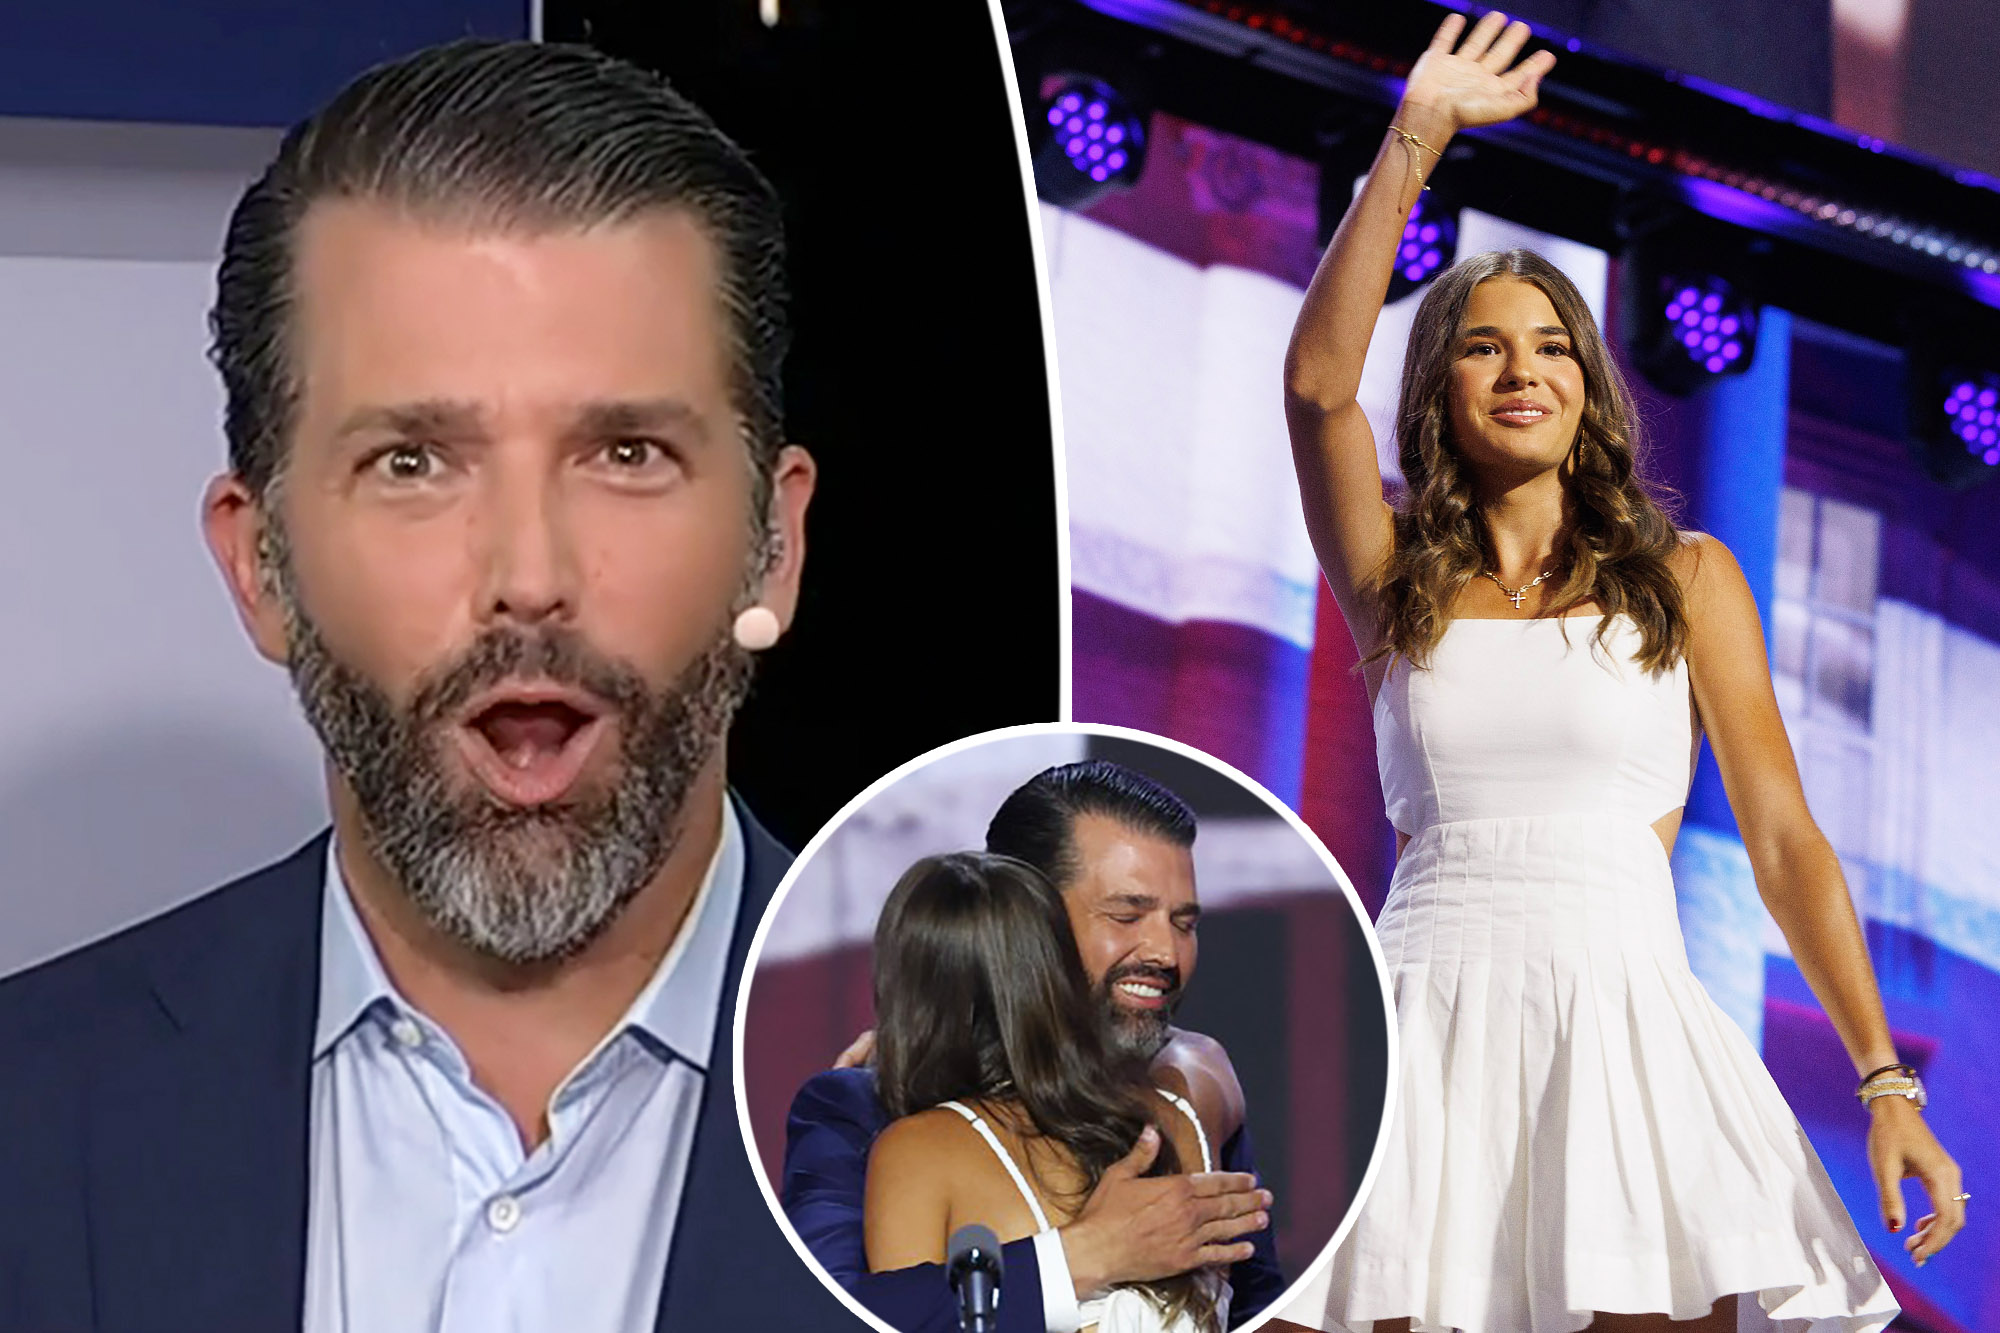 Donald Trump Jr.'s Hilarious Warning to Teen Boys About His Daughter at RNC Sparks Laughter